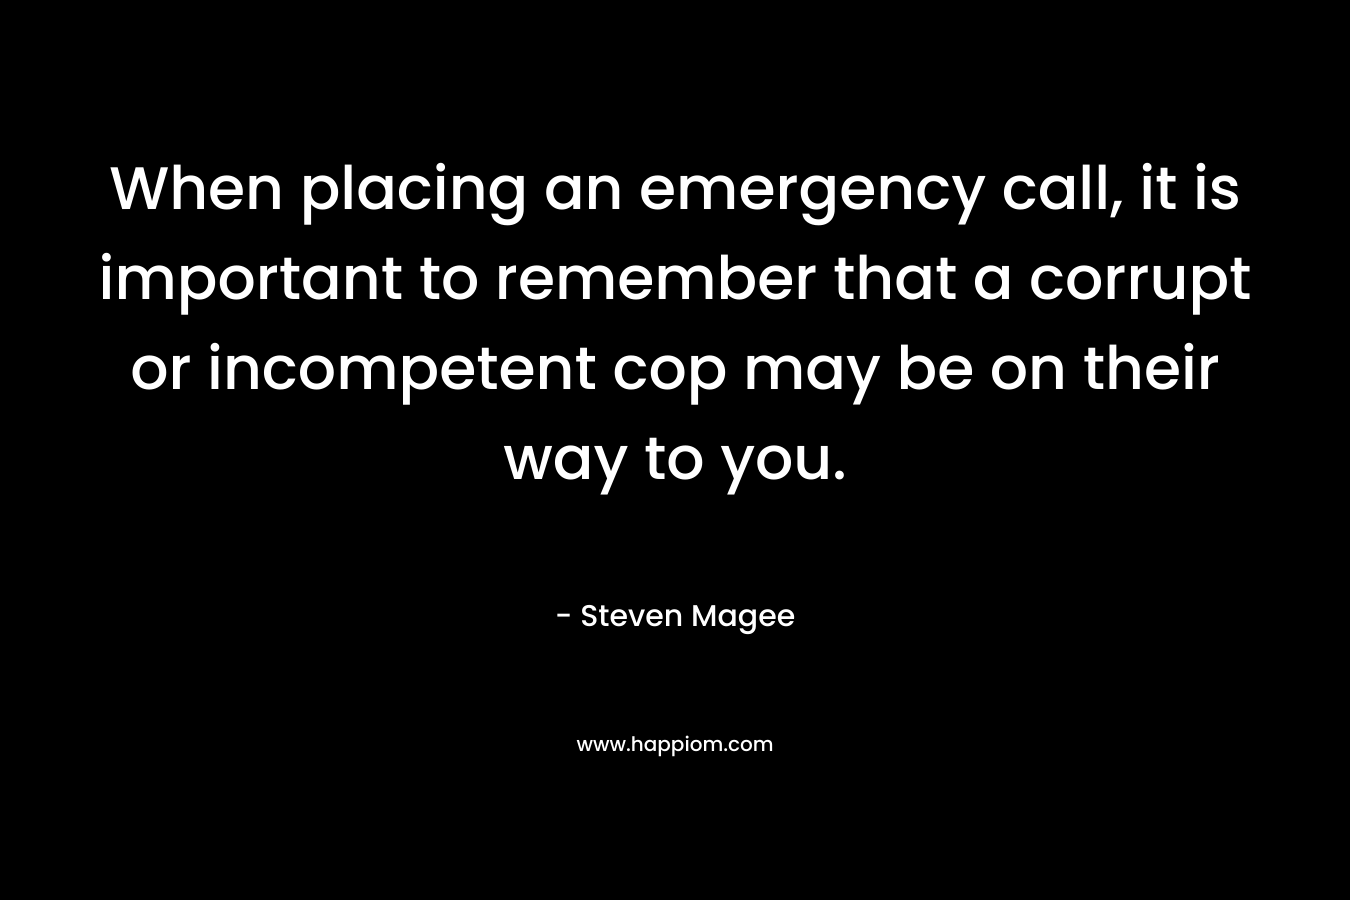 When placing an emergency call, it is important to remember that a corrupt or incompetent cop may be on their way to you. – Steven Magee